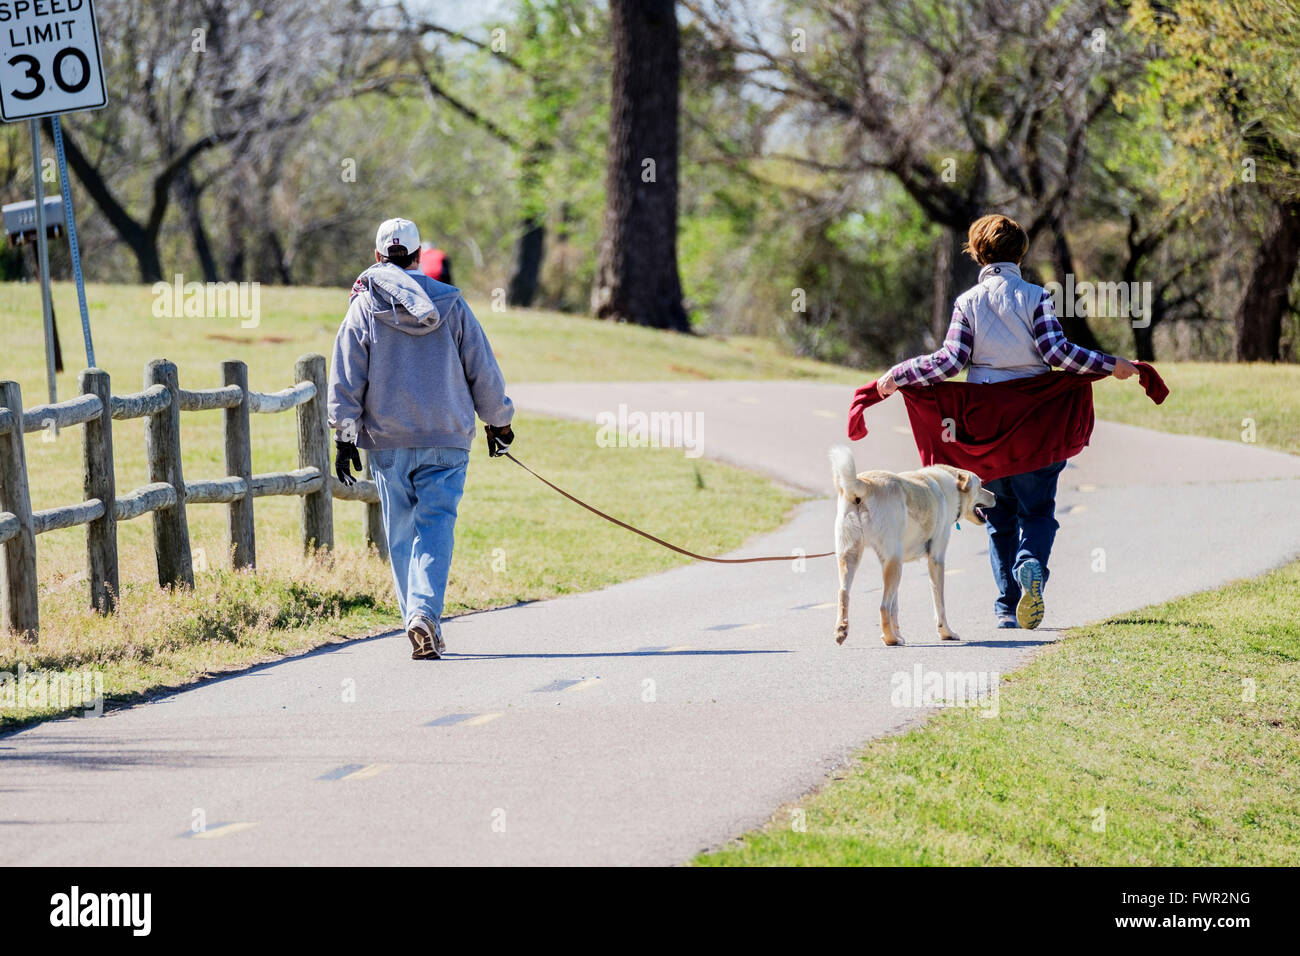 A man and woman walk the trails with their leashed dog at Overholser lake, Oklahoma City, Oklahoma, USA. Stock Photo